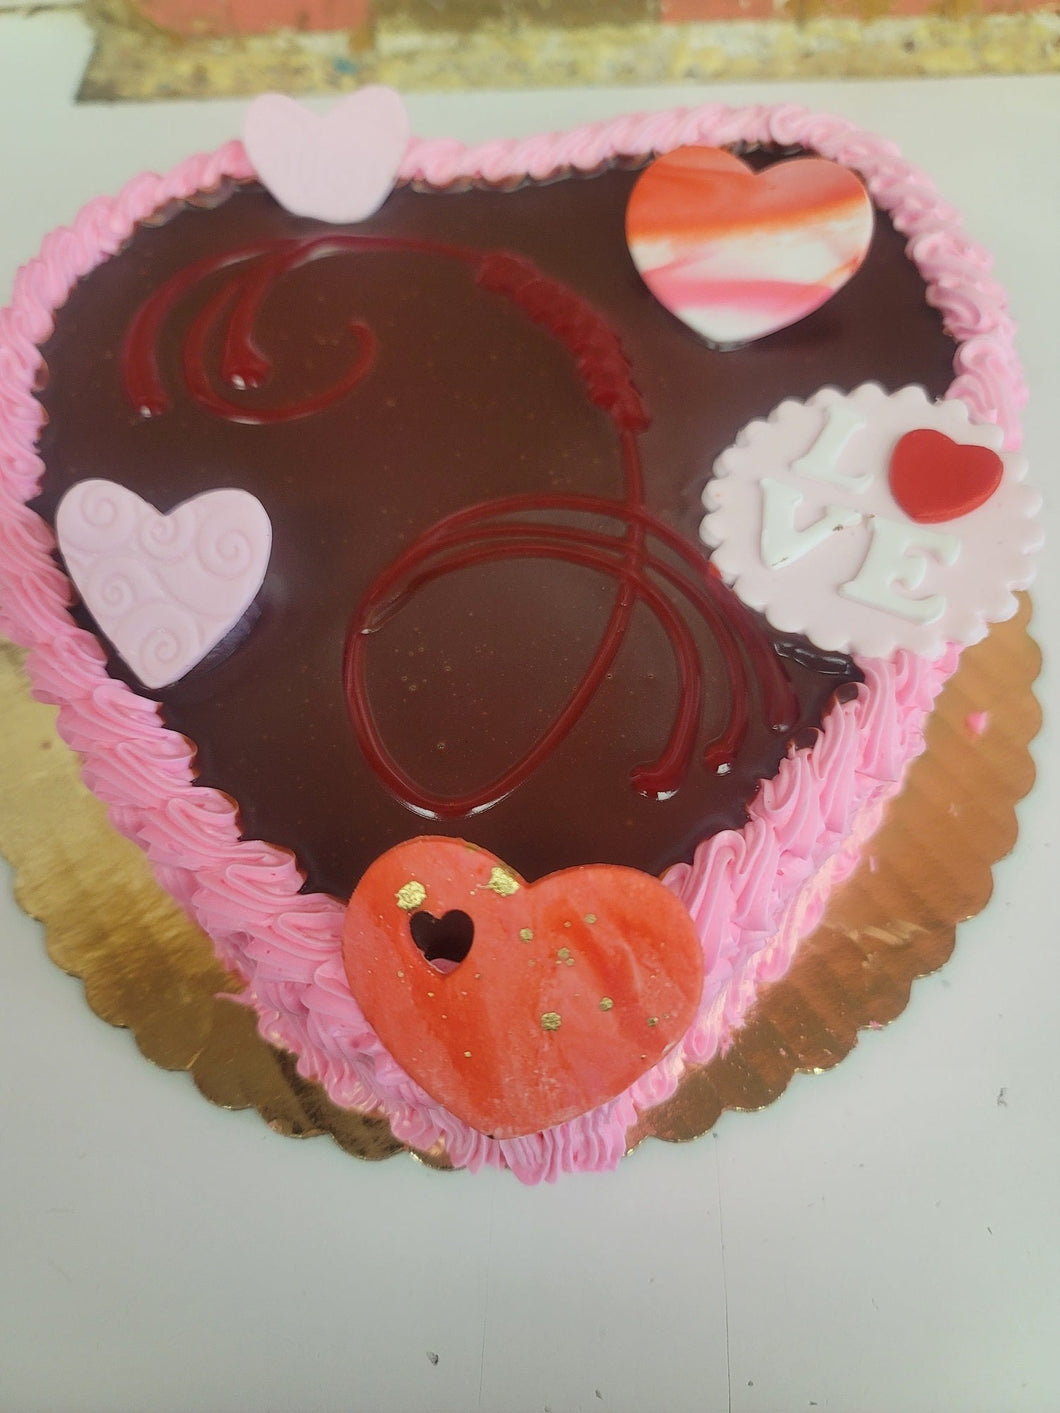 Heart shaped Strawberry filled Cake